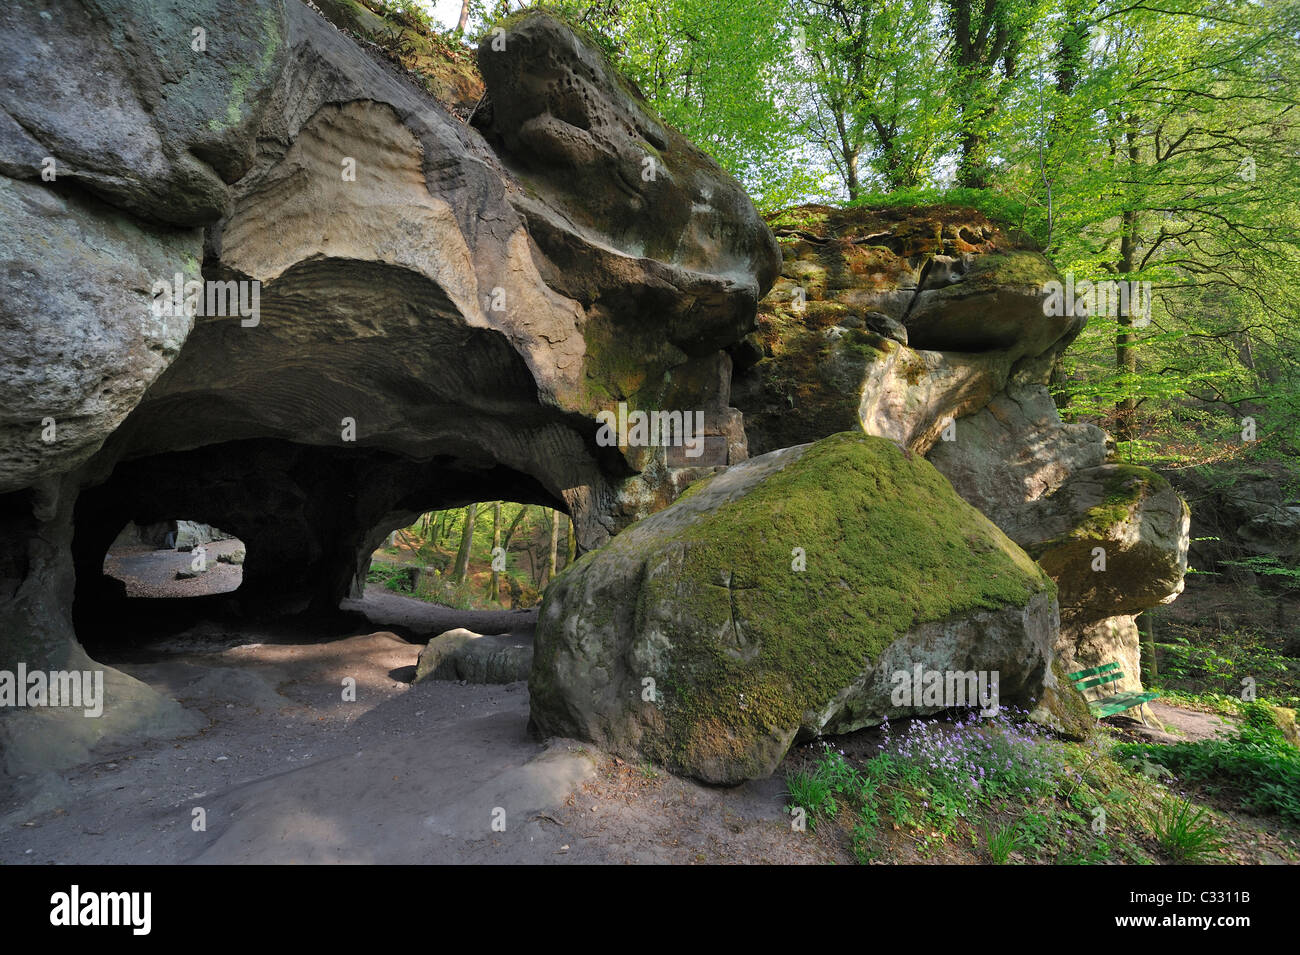 The Hohllay cave in Berdorf, Little Switzerland / Mullerthal, Grand Duchy of Luxembourg Stock Photo